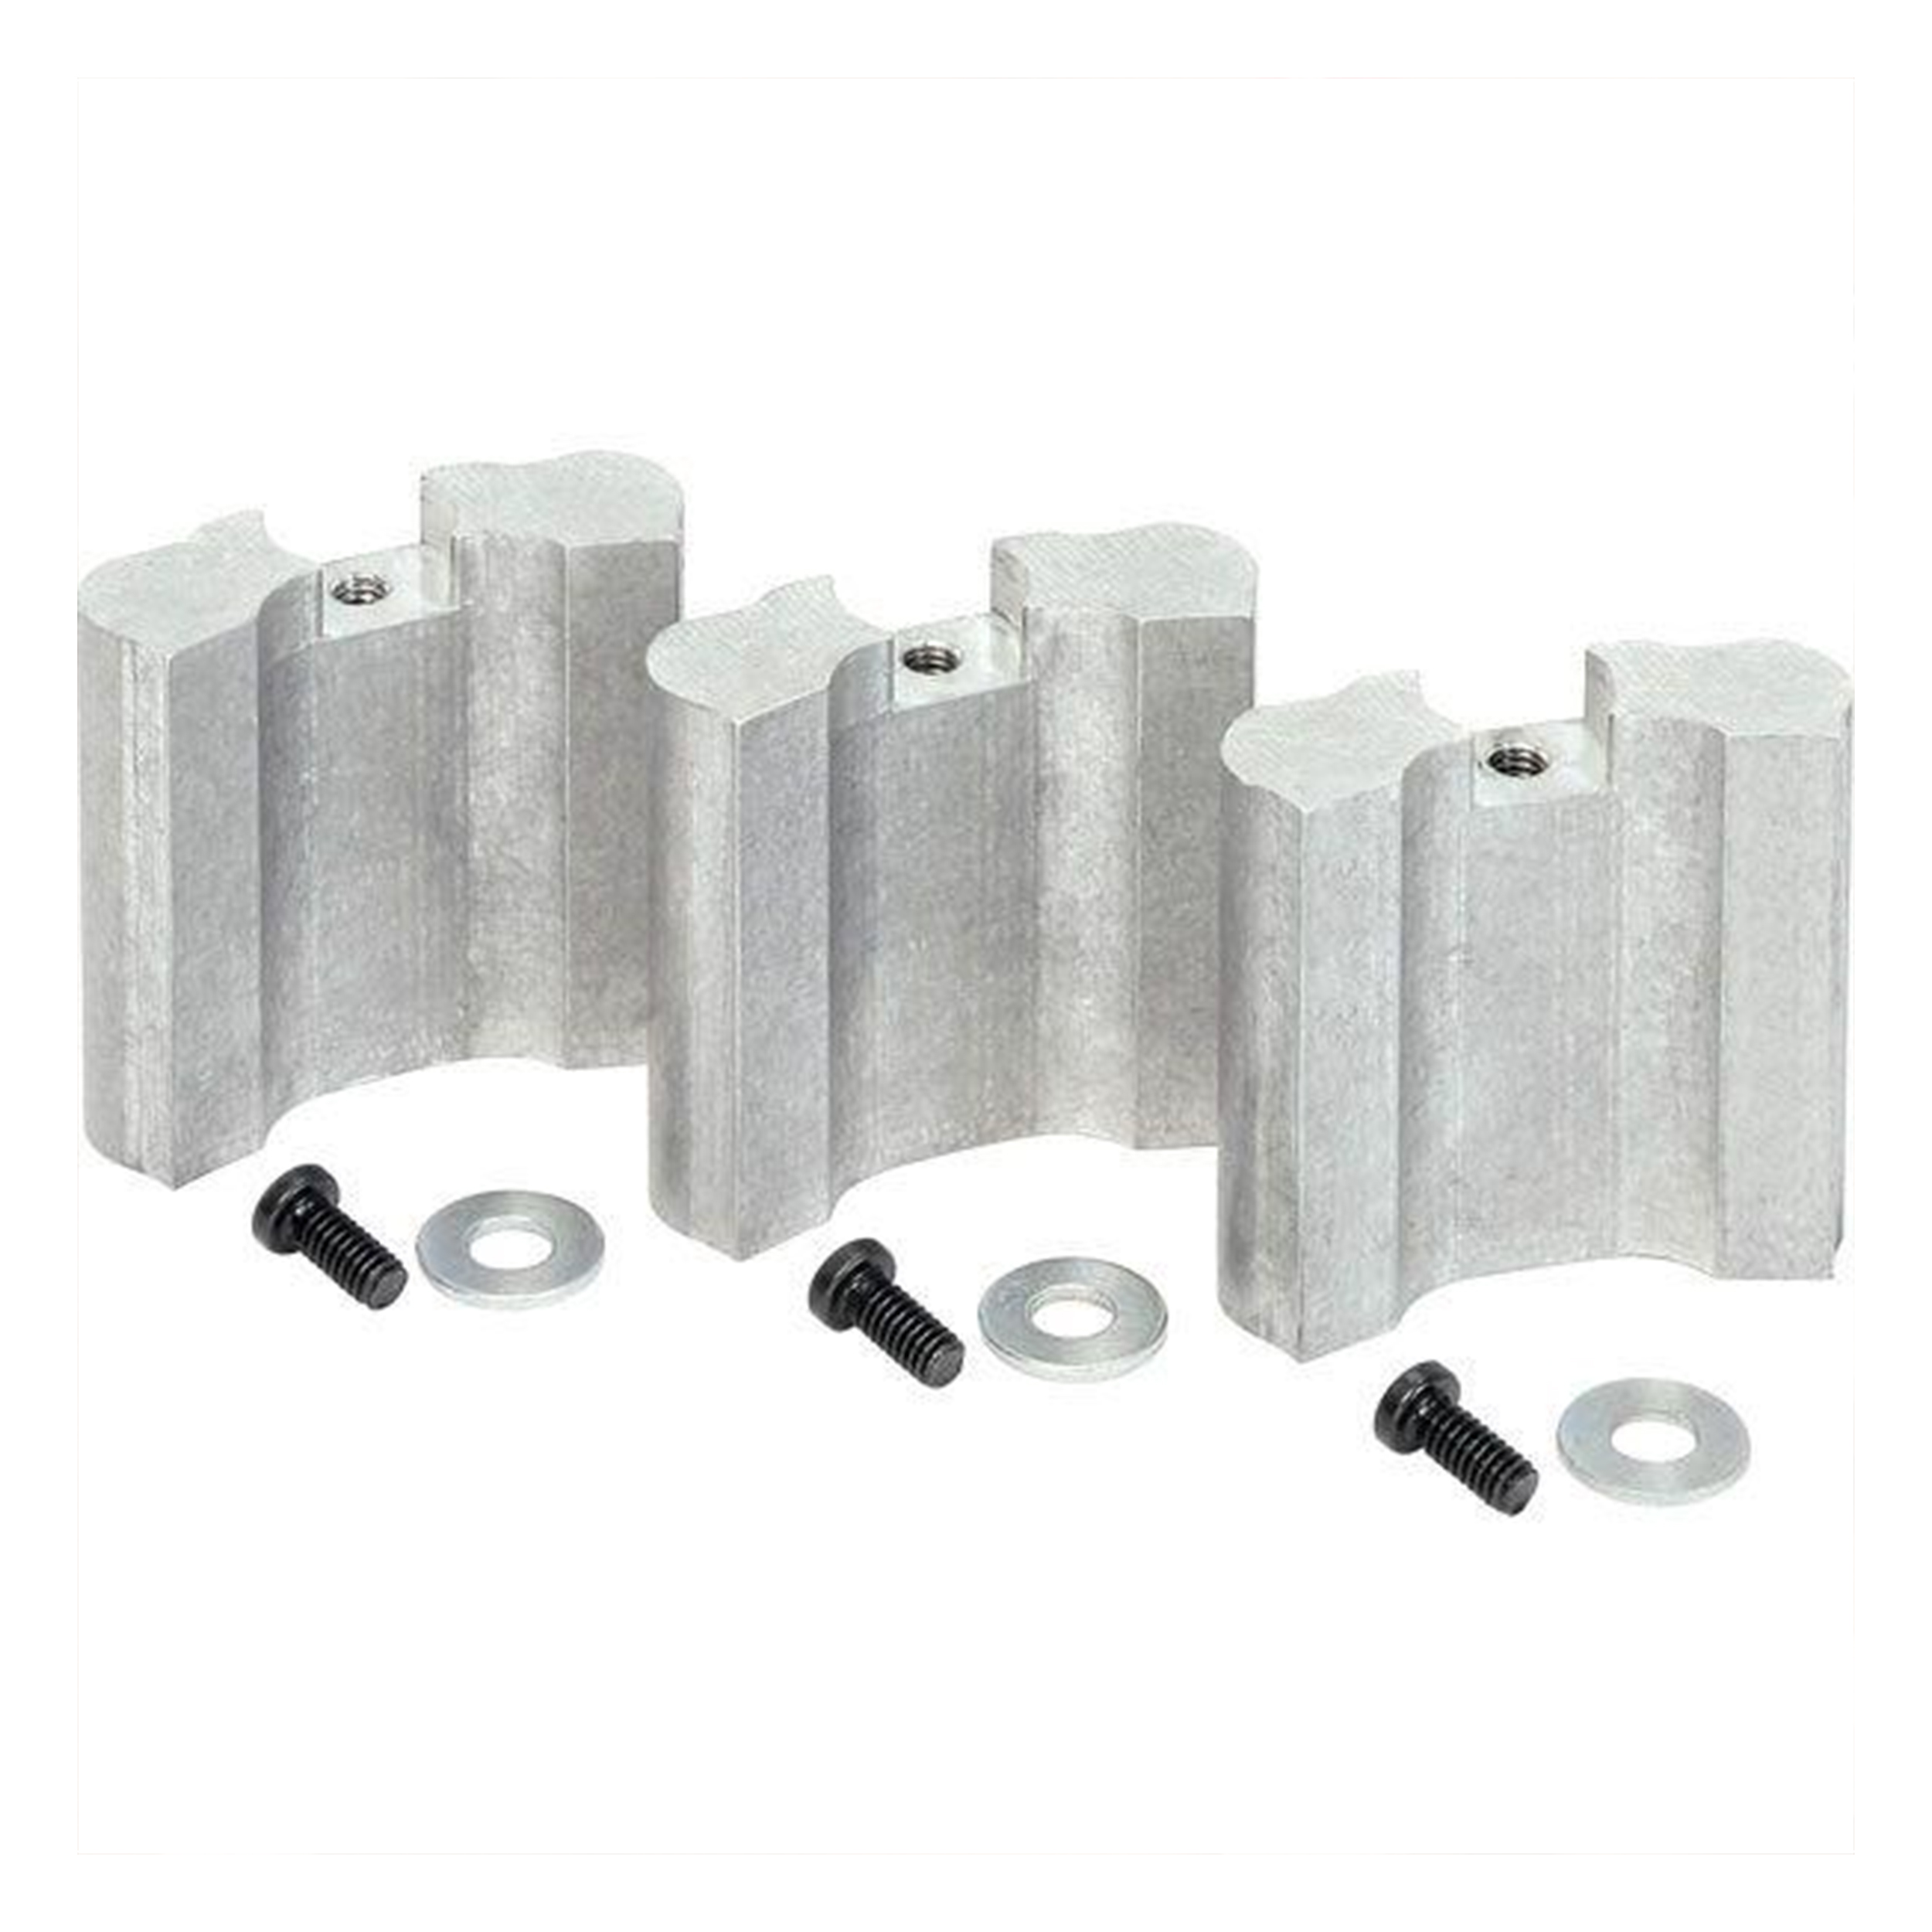 3.5-inch Motor Pads For V2 Router Lift